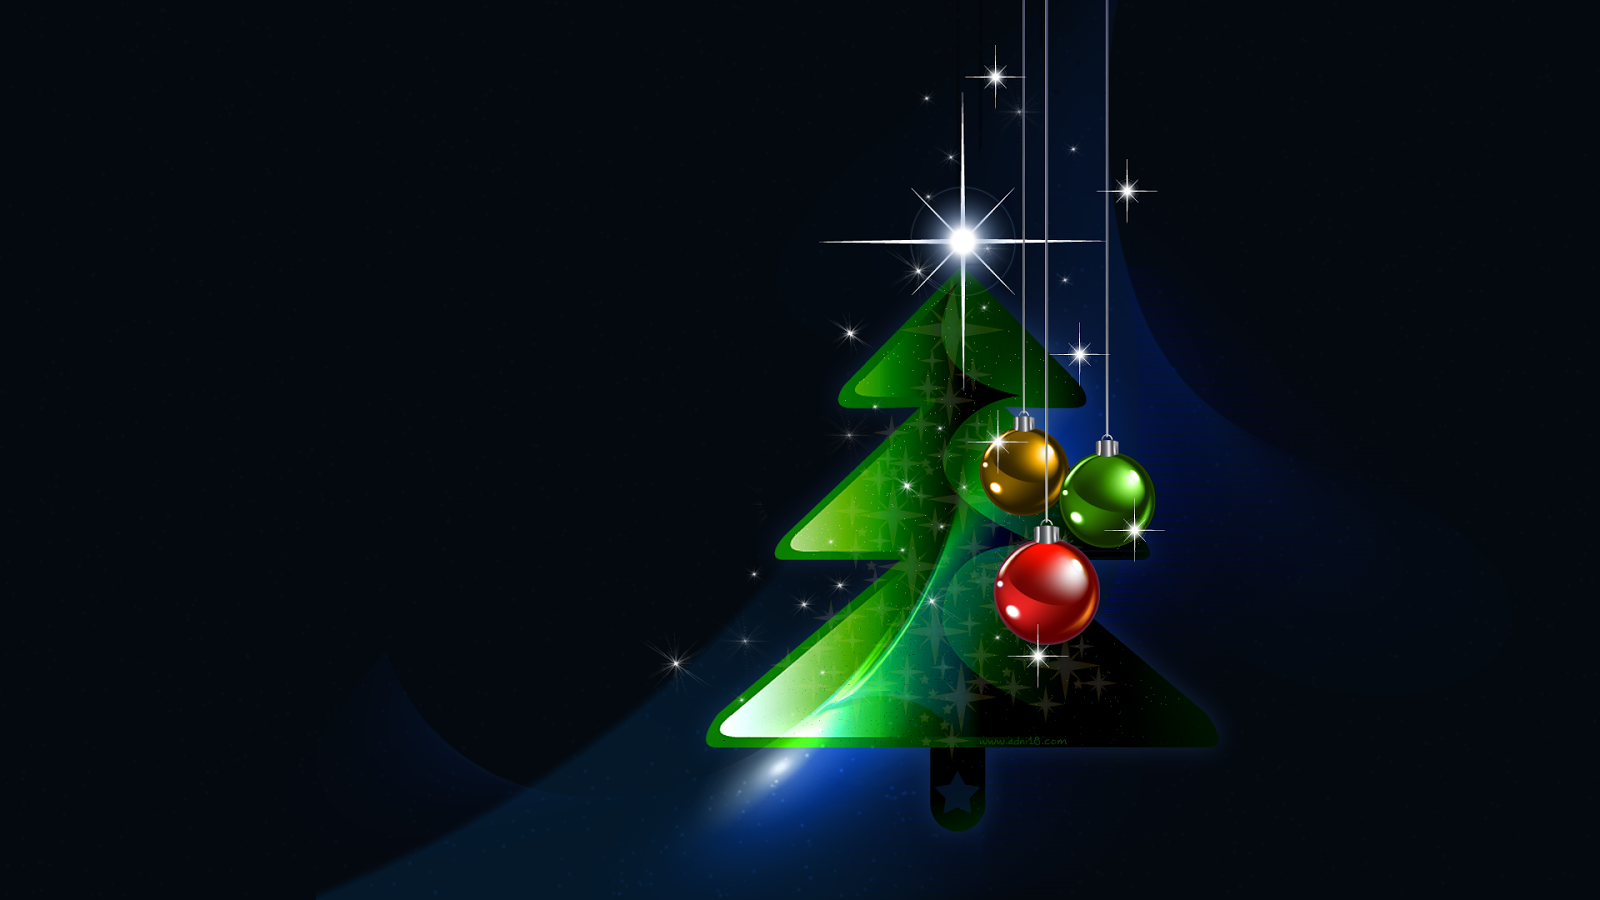 Download HD Merry Christmas Wallpapers 2017